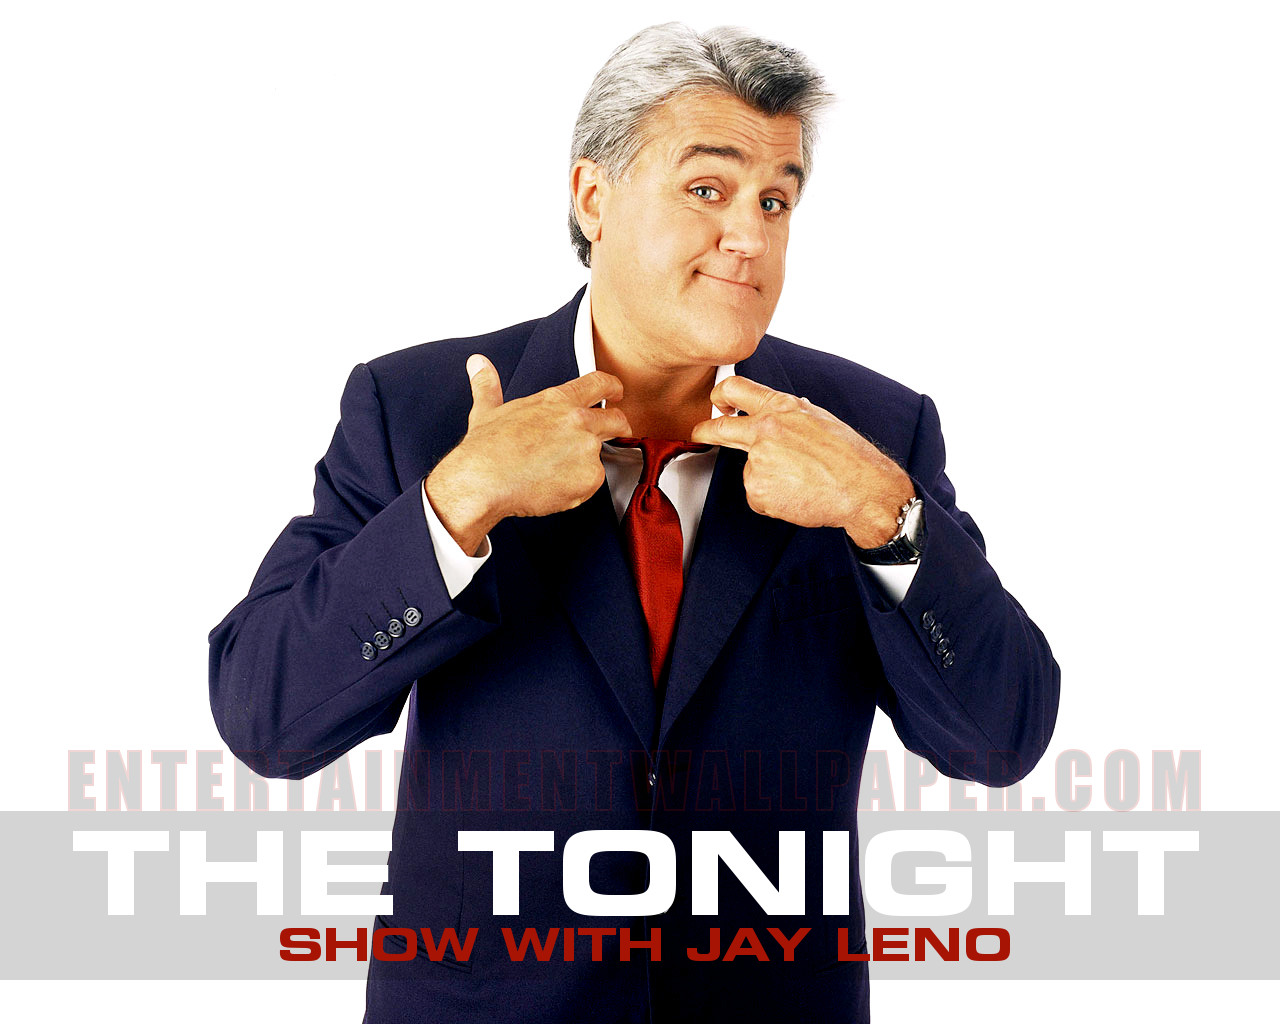 For those of you who've been hiding under a rock for the last few months, Jay Leno has returned to reclaim his title as host of The Tonight Show.